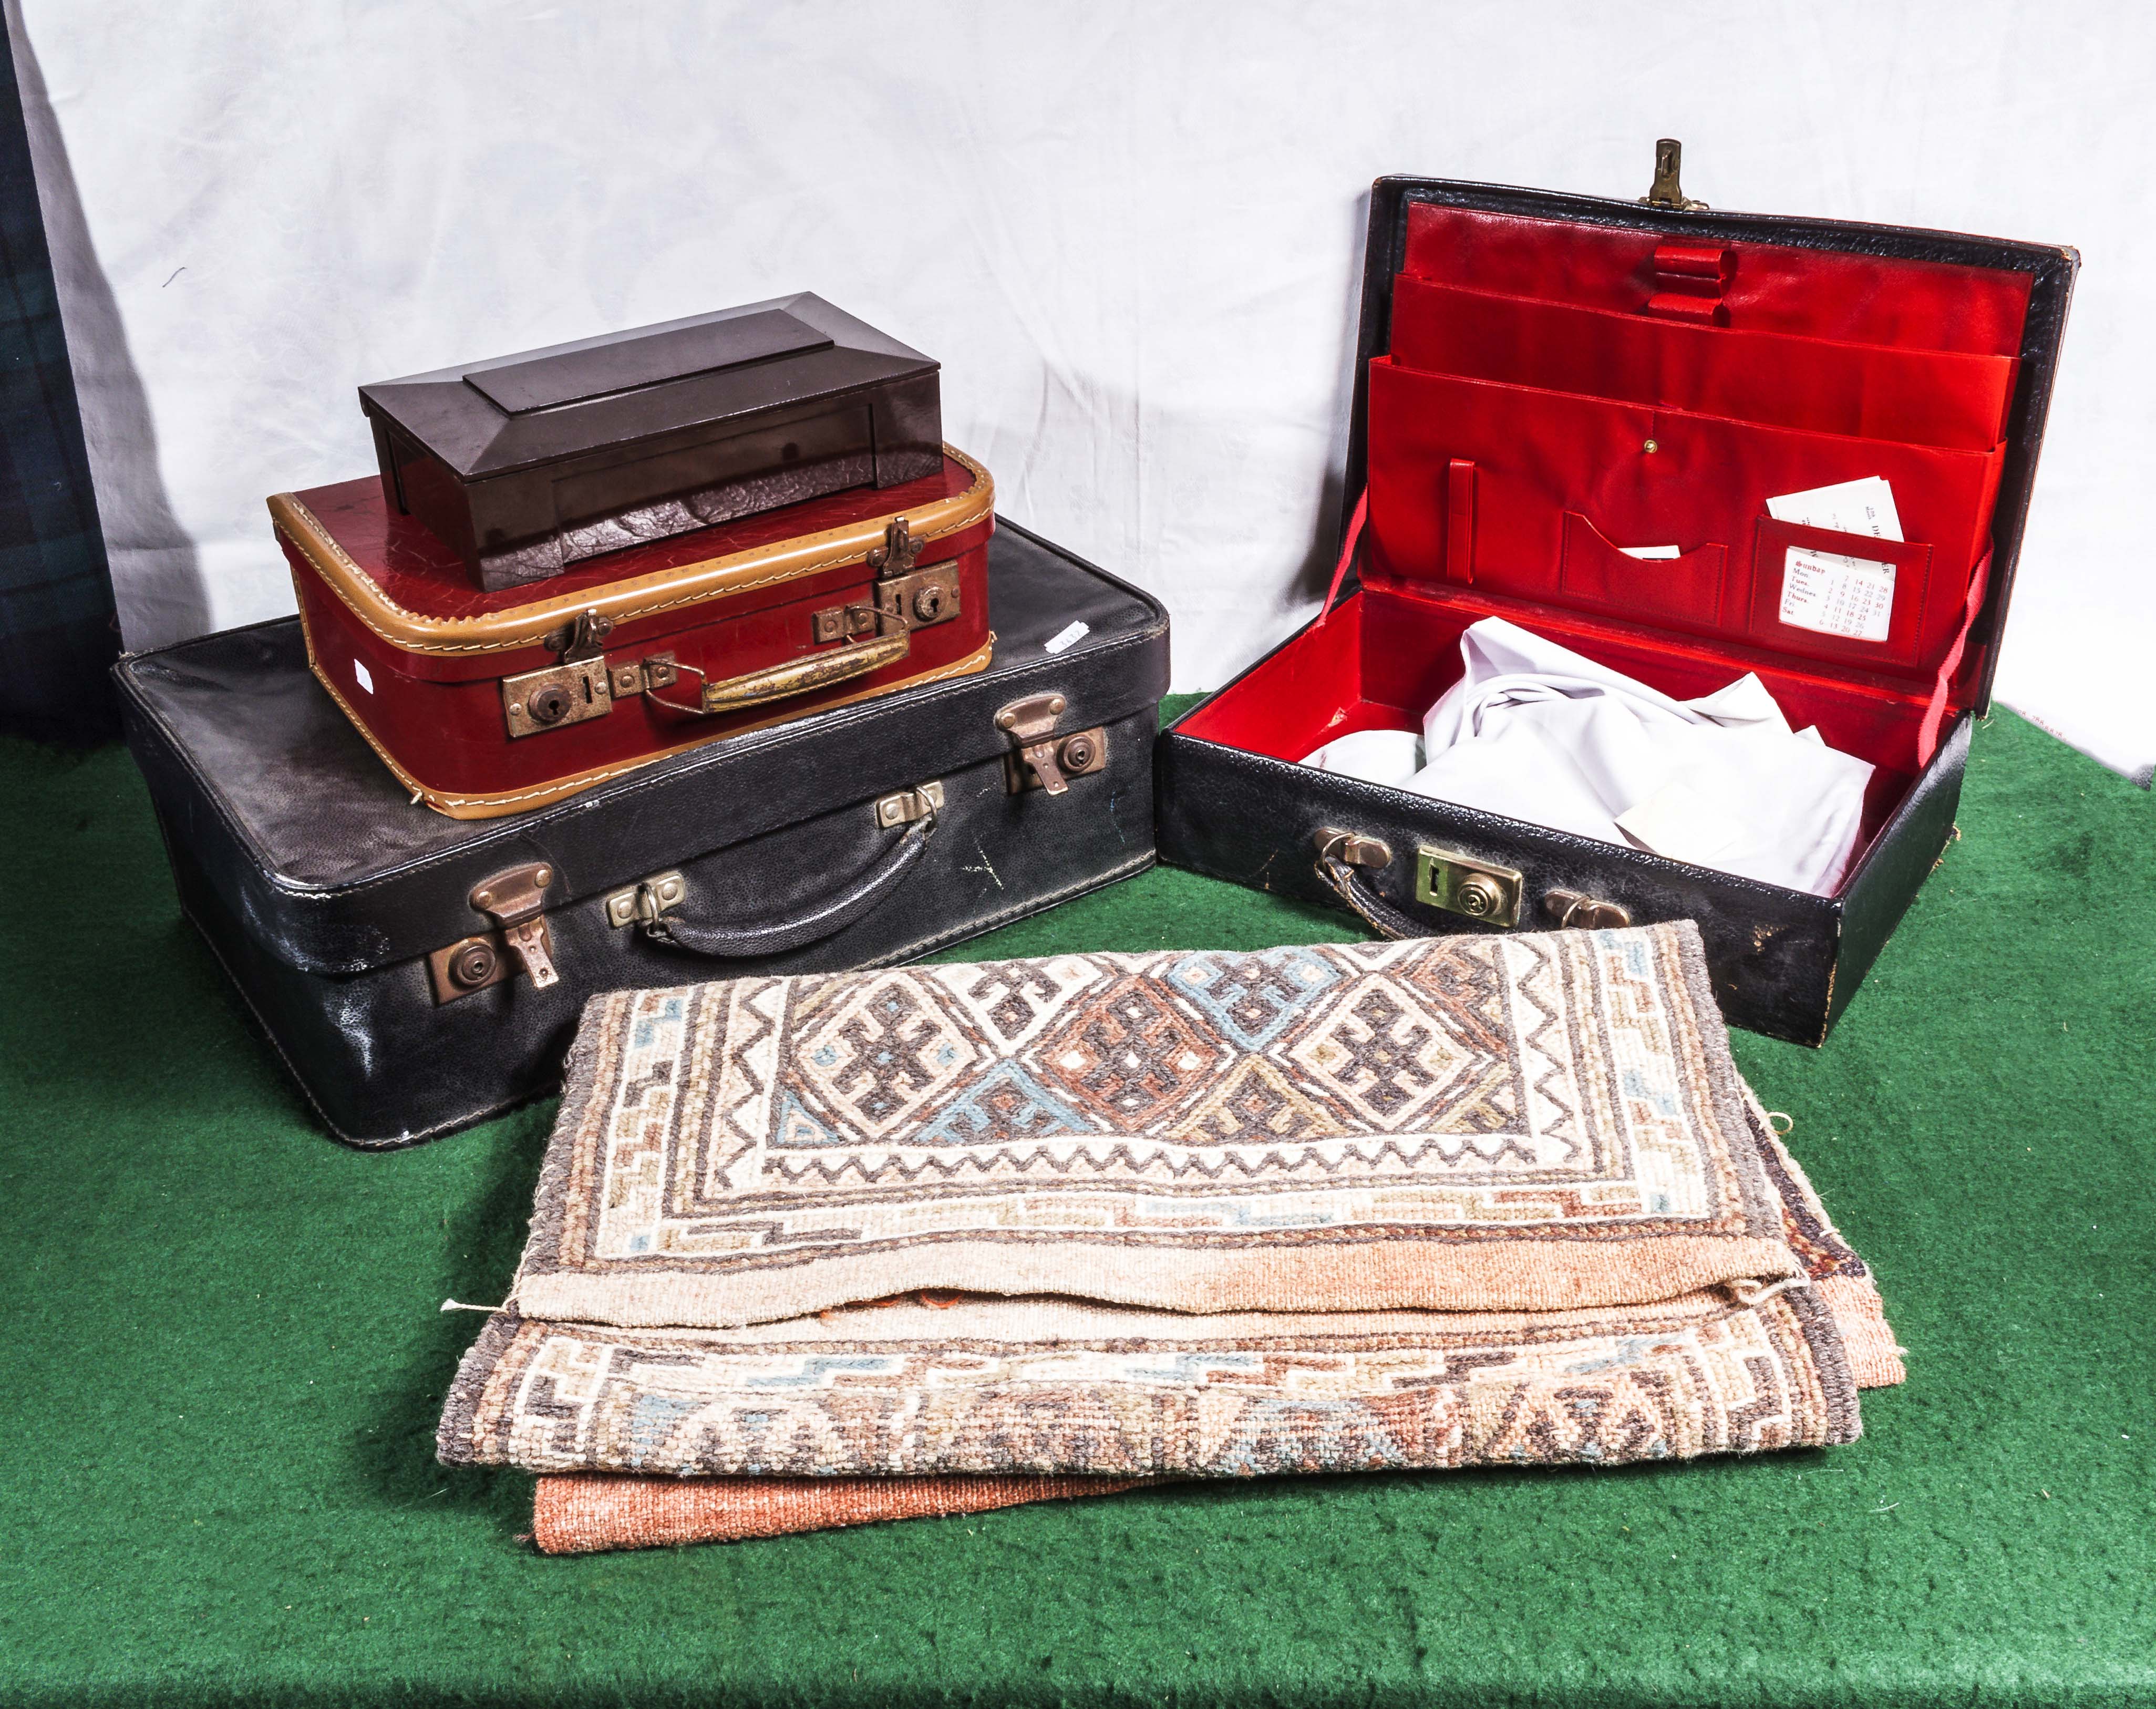 Three vintage cases a box and a saddle bag